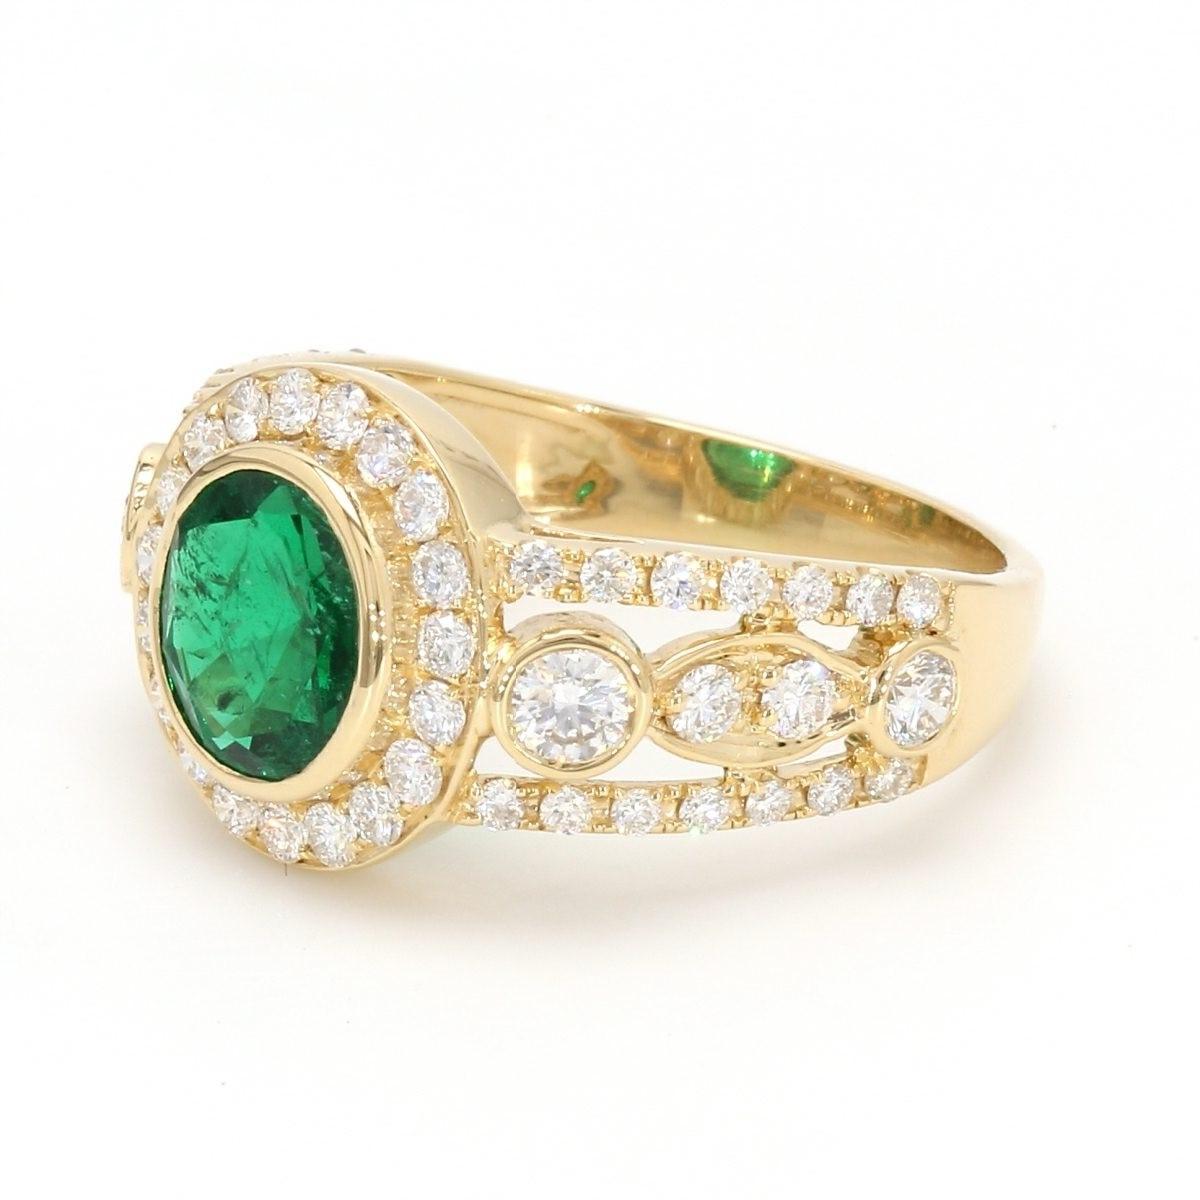 A Beautiful Handcrafted Ring in 18 Karat  Gold with Natural Old Mined Sandawan , Zimbabwe origin Emerald. Emerald from these Mines were known for its color and small Size and any size over 1.25 carat was a rarity.  Source GIA 

Emerald